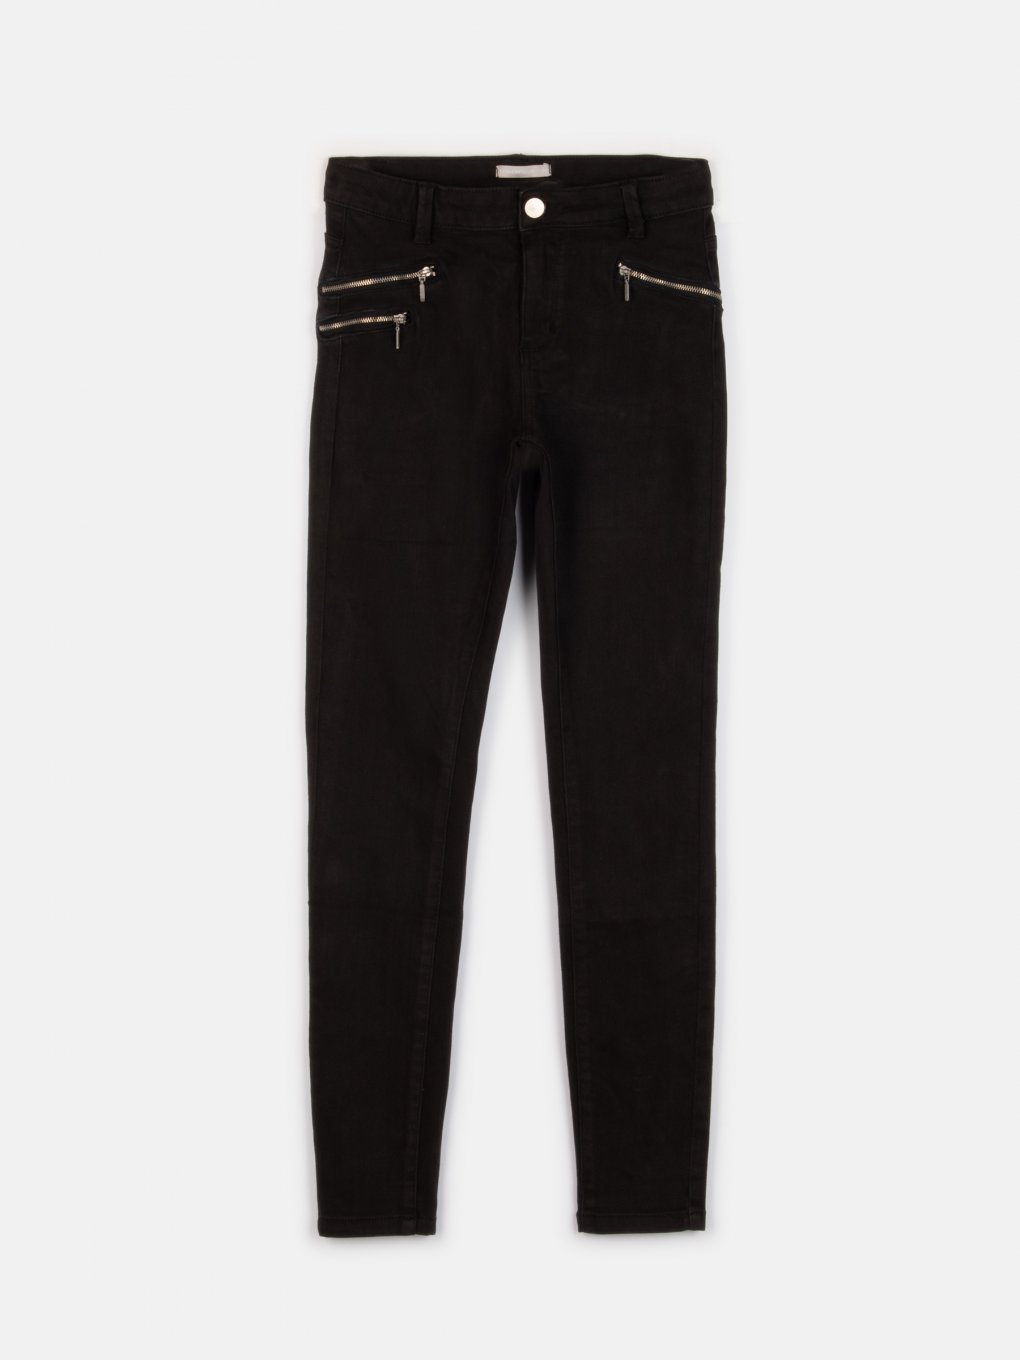 Skinny pants with decorative zippers